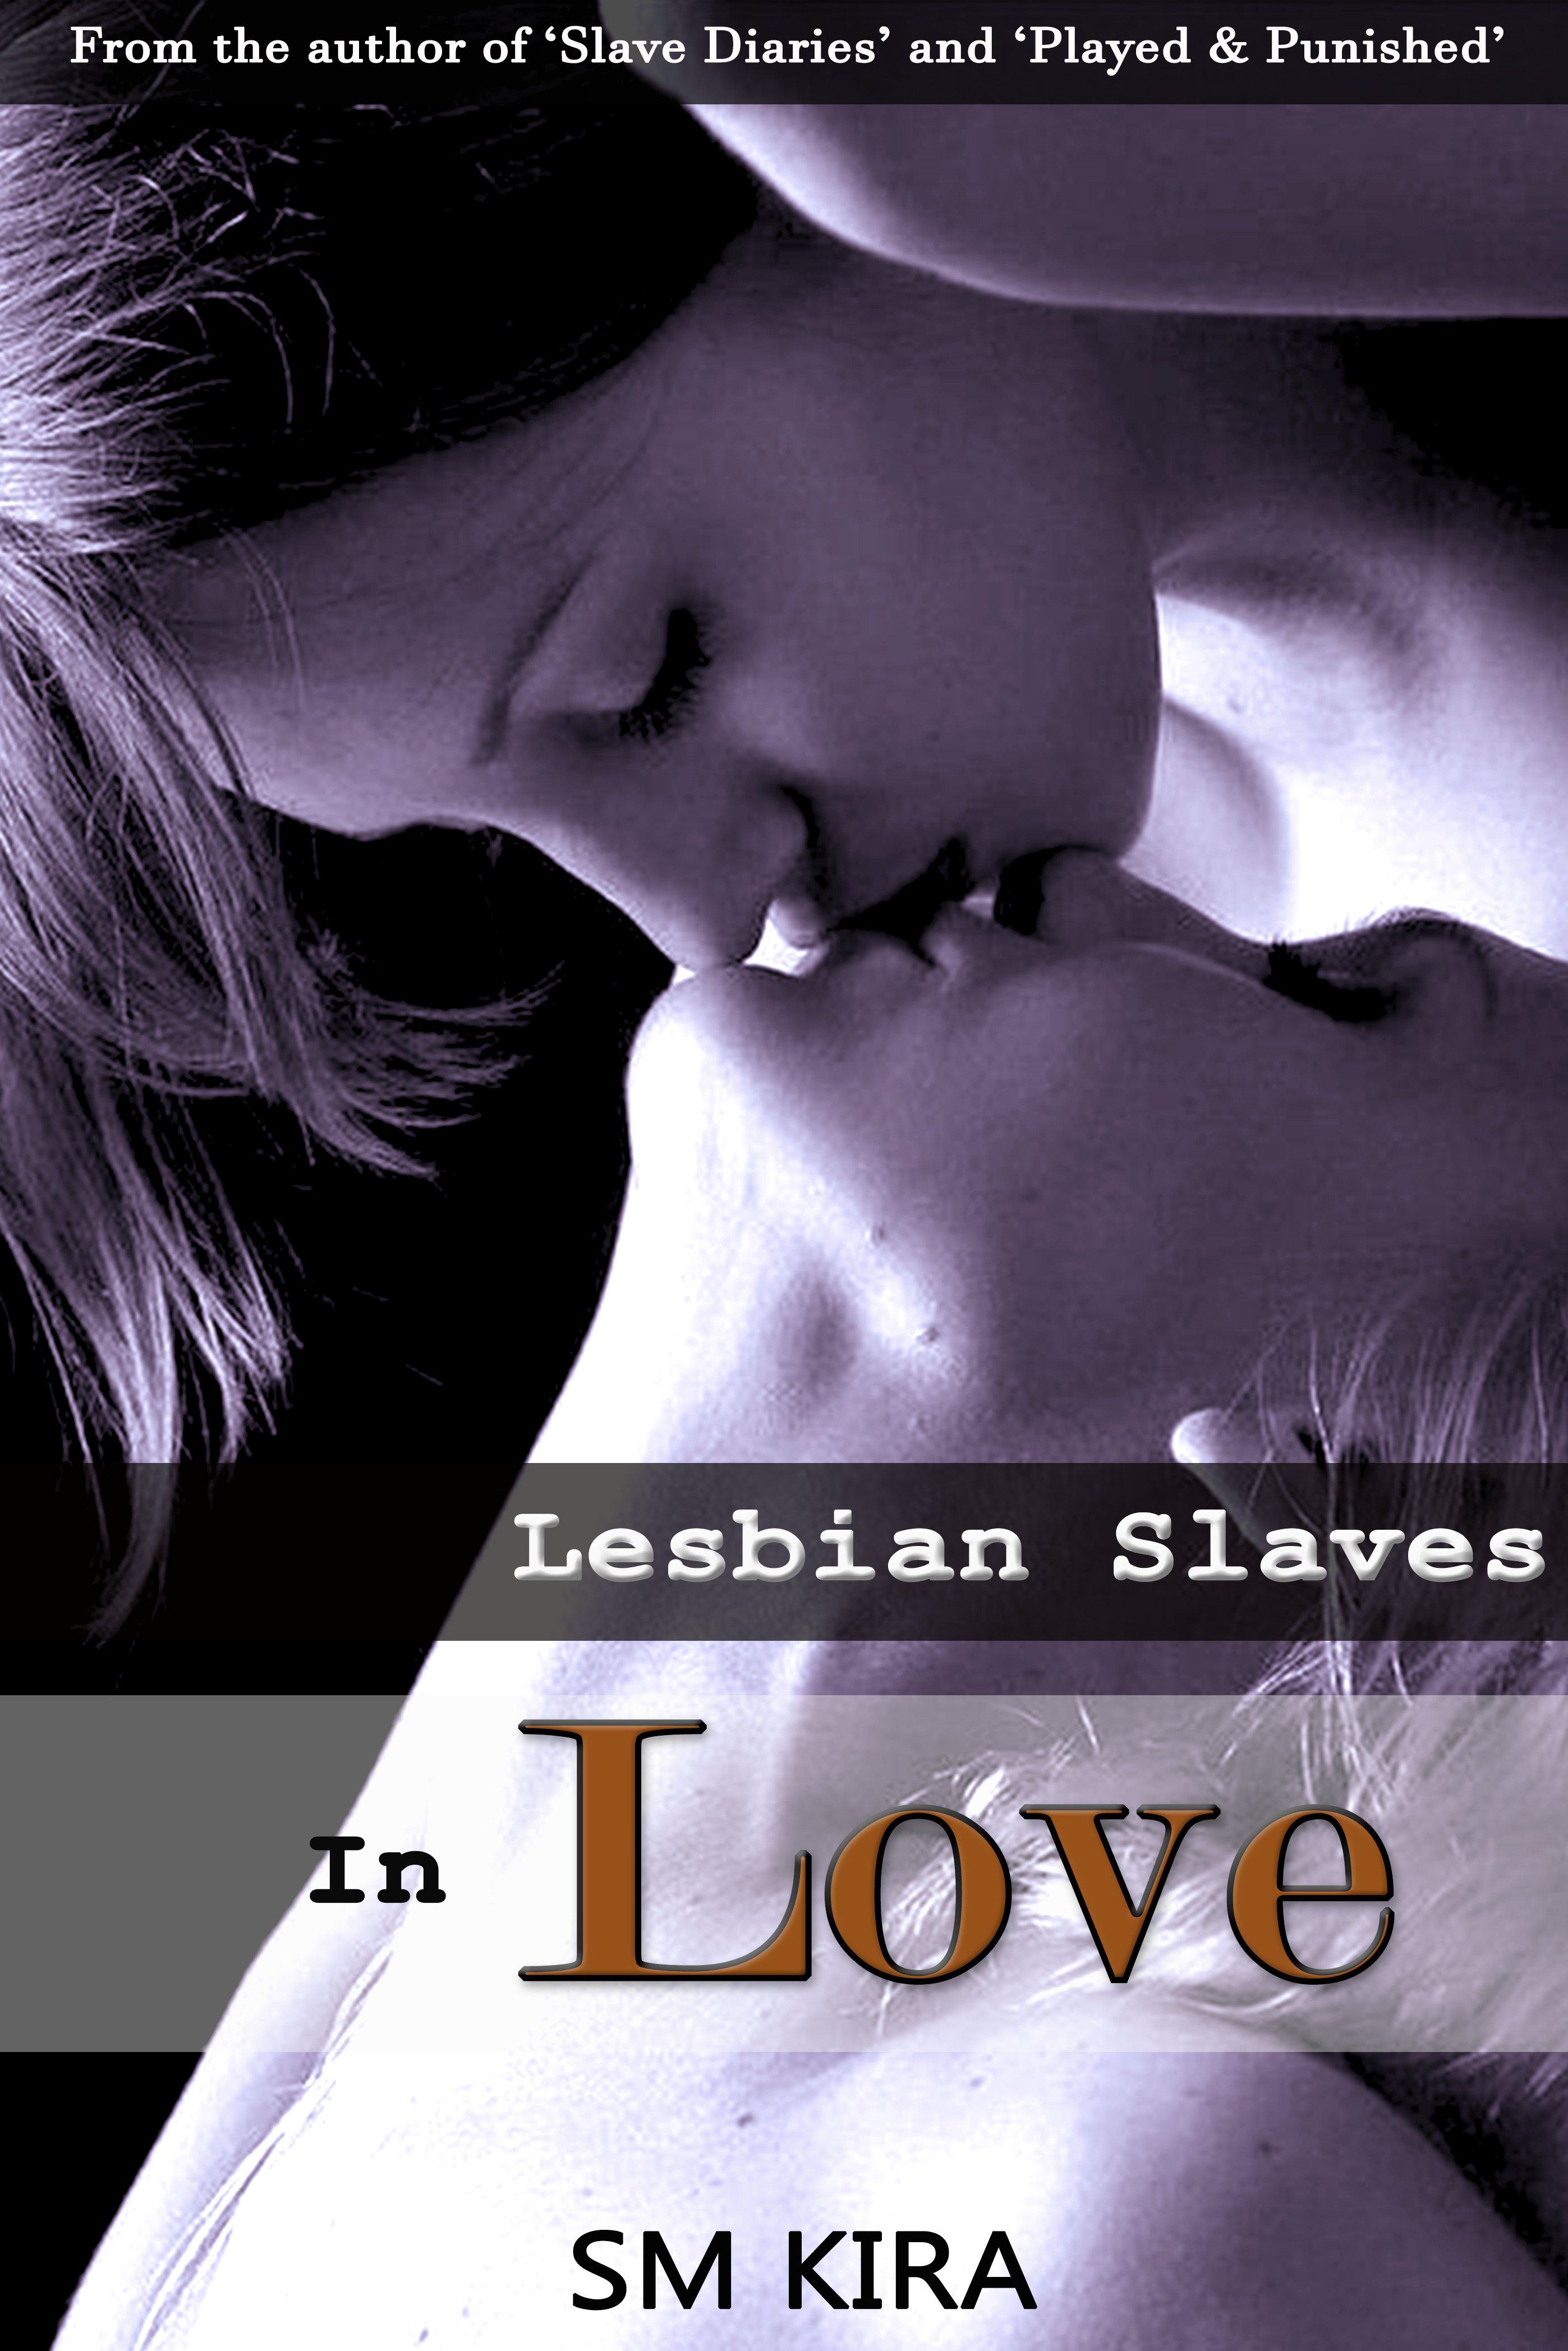 amanda brooke rogers recommends lesbian slave pictures pic